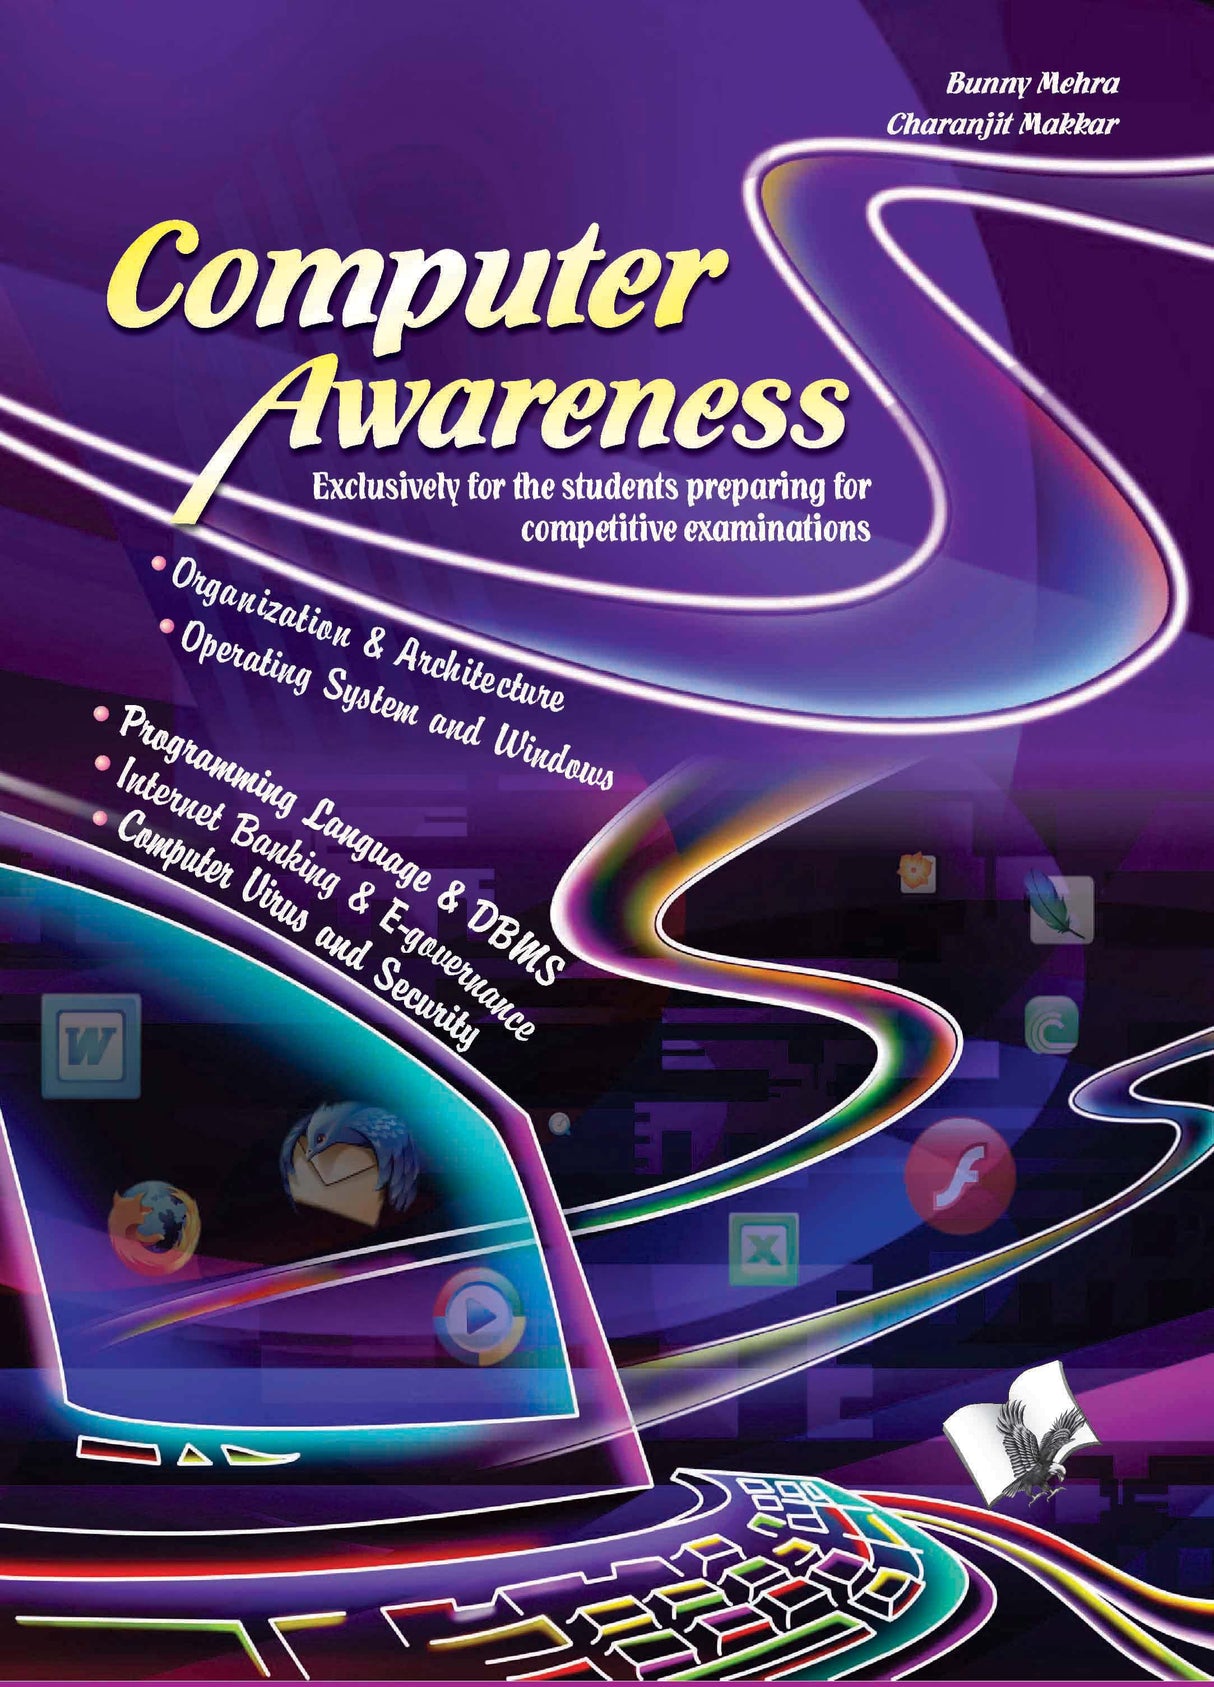 Computer Awareness: Exclusively for the students preparing for competitive examinations